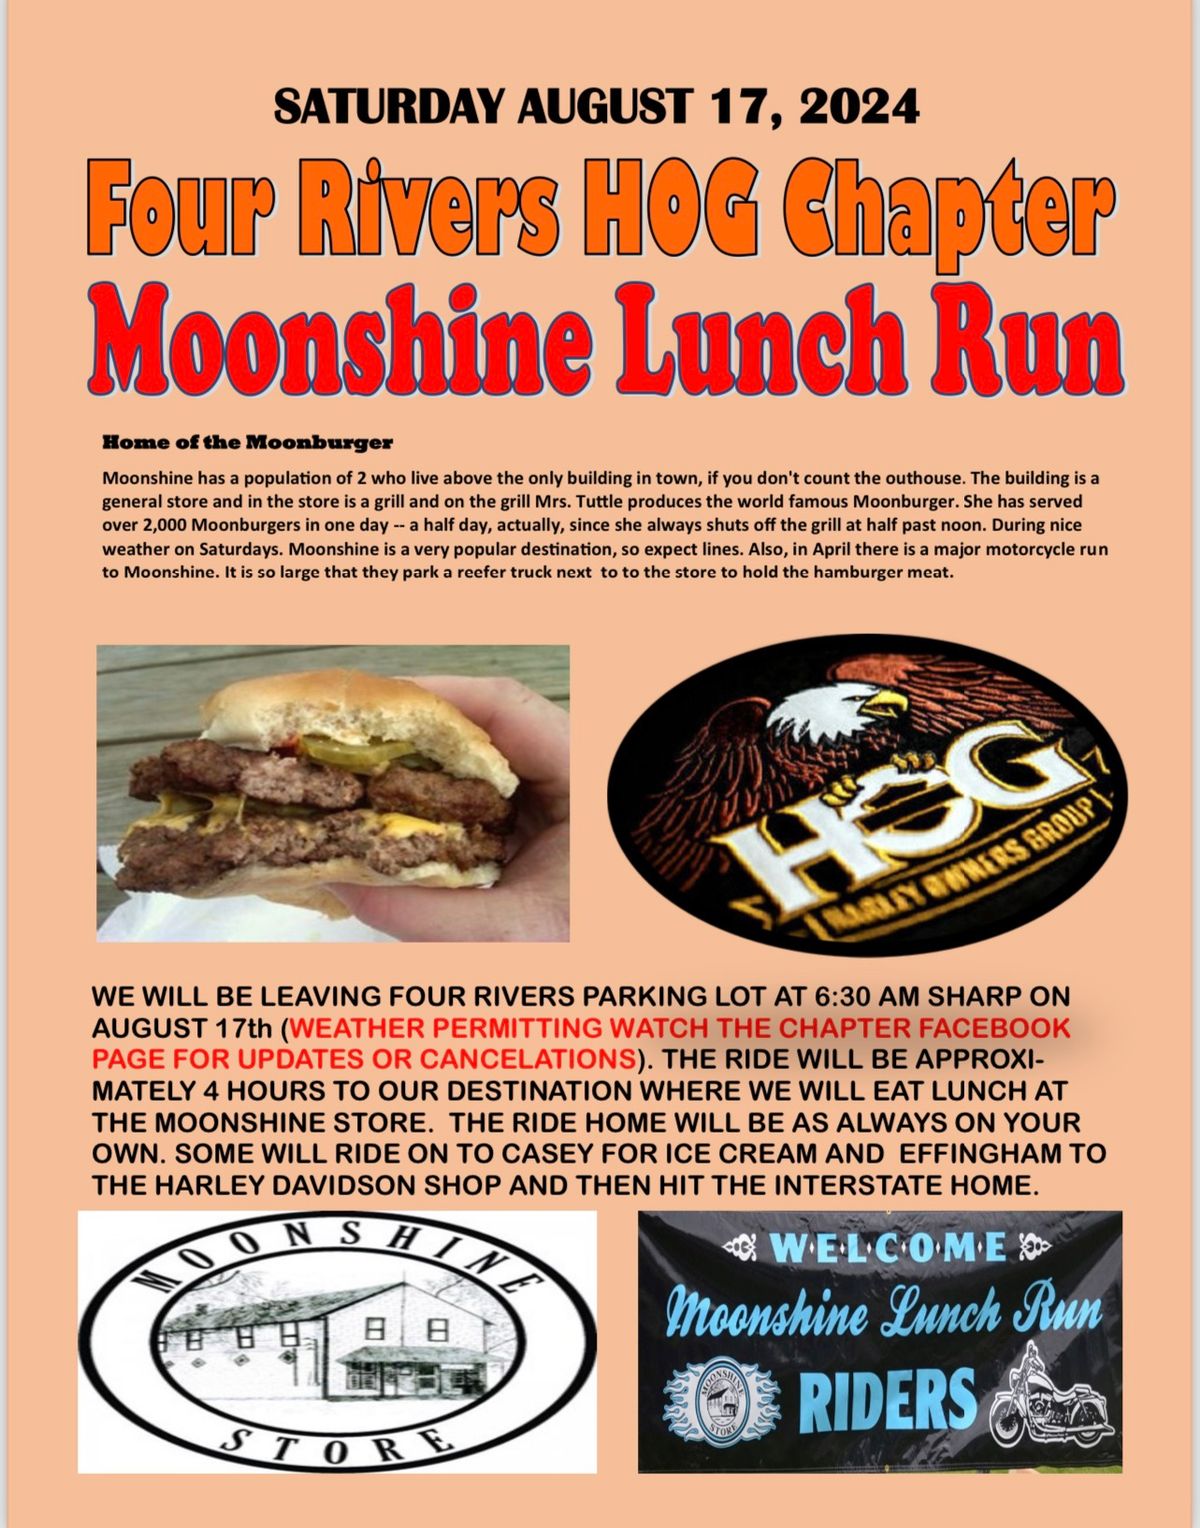 H.O.G Moonshine Lunch Ride